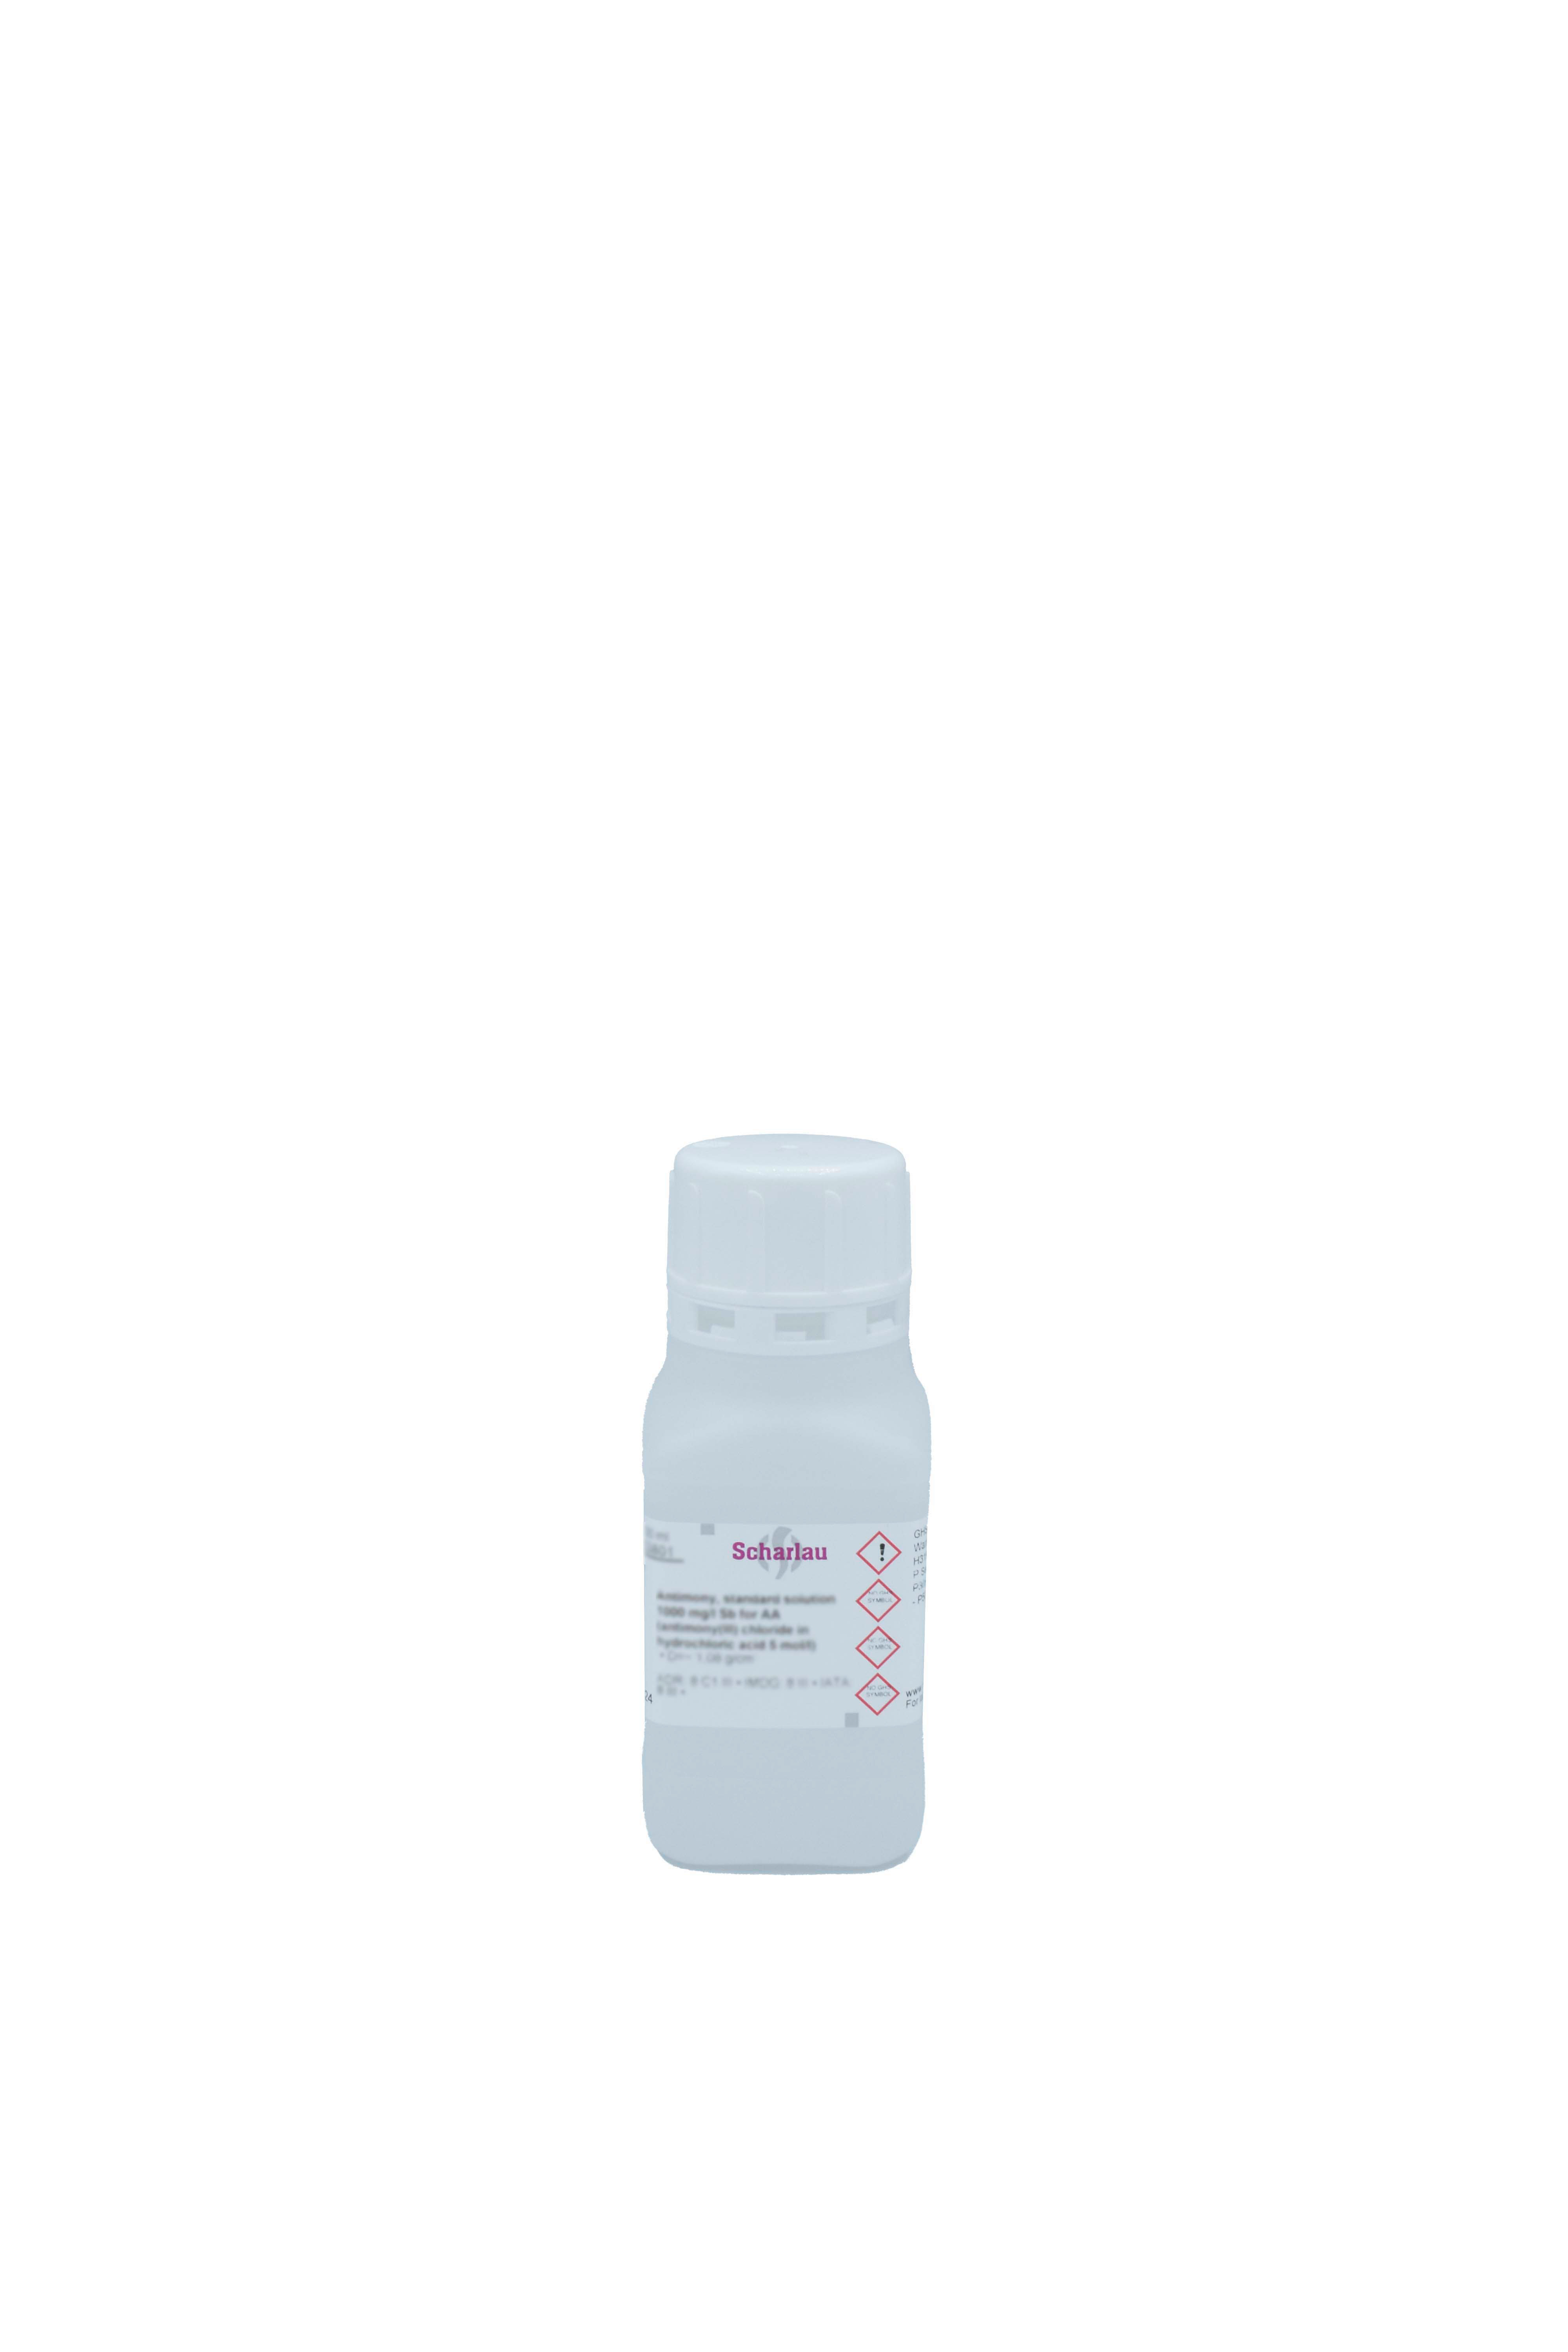 Antimony, standard solution 1000 mg/l Sb for AAsS (antimony(III) chloride in HCl 5 mol/l)